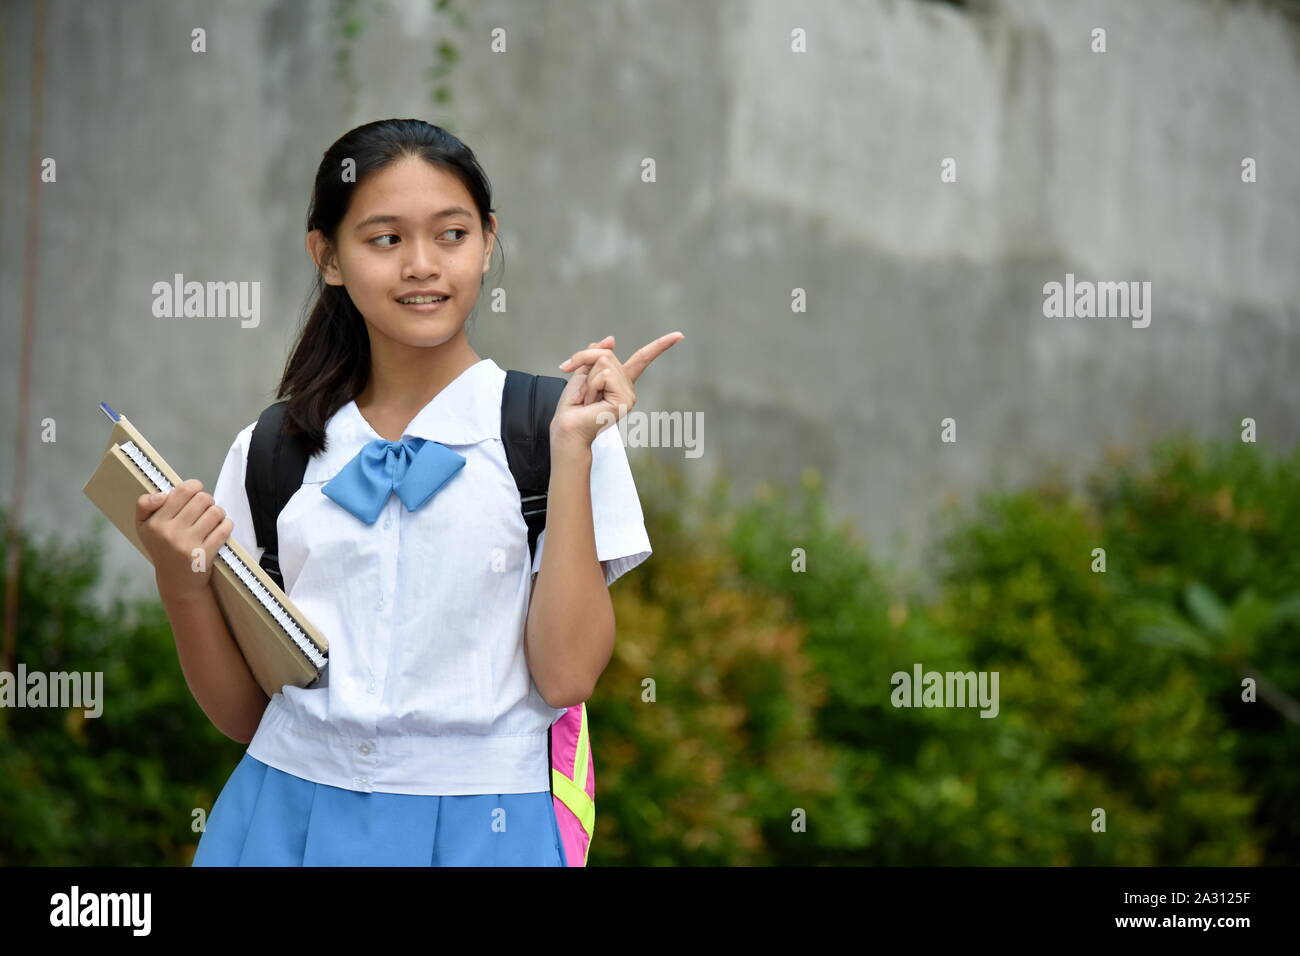 A Girl Student Pointing Stock Photo